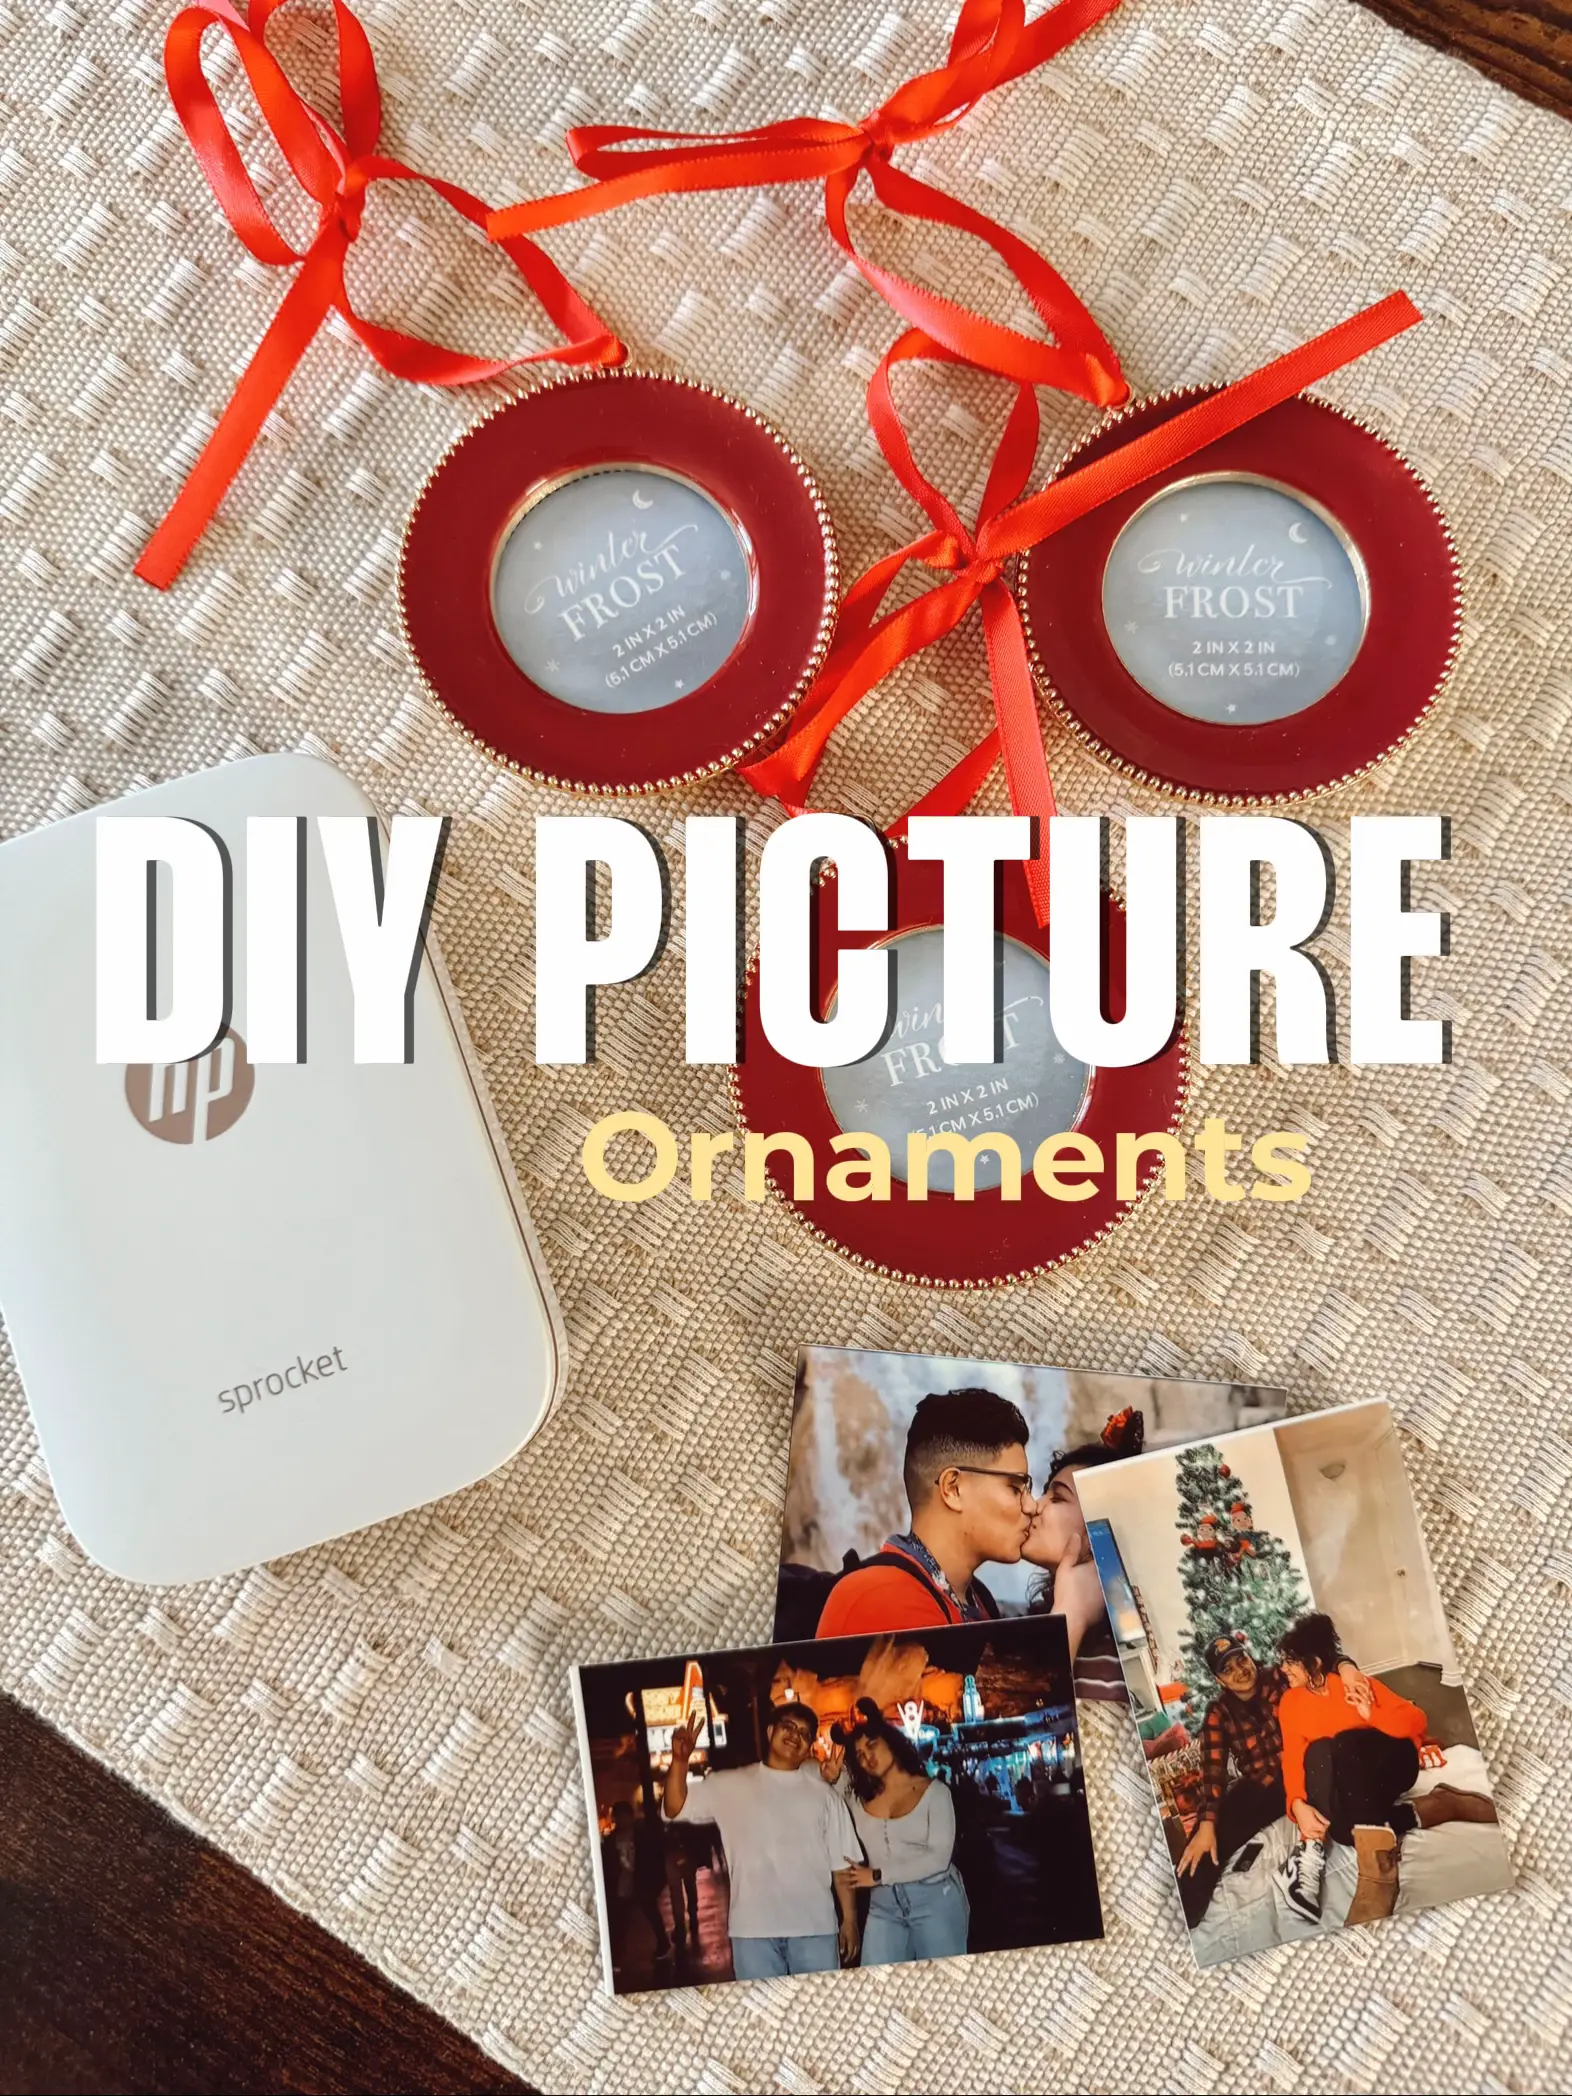 DIY Velvet Ornaments, Video published by CindyMade2Style